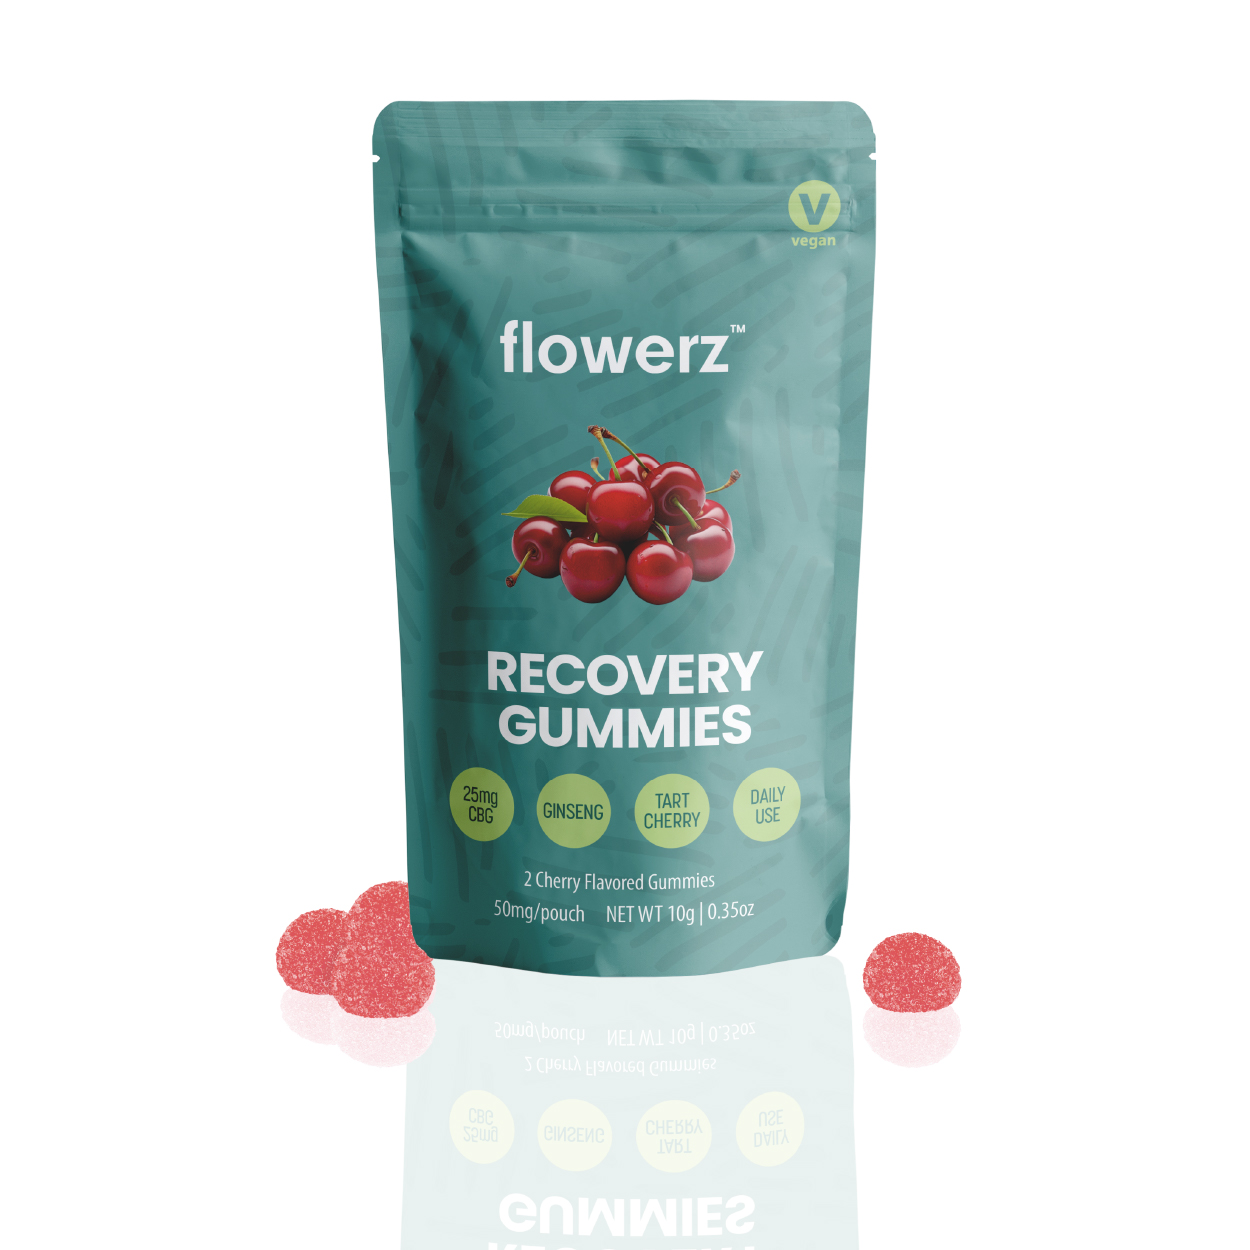 flowerz recovery gummies package